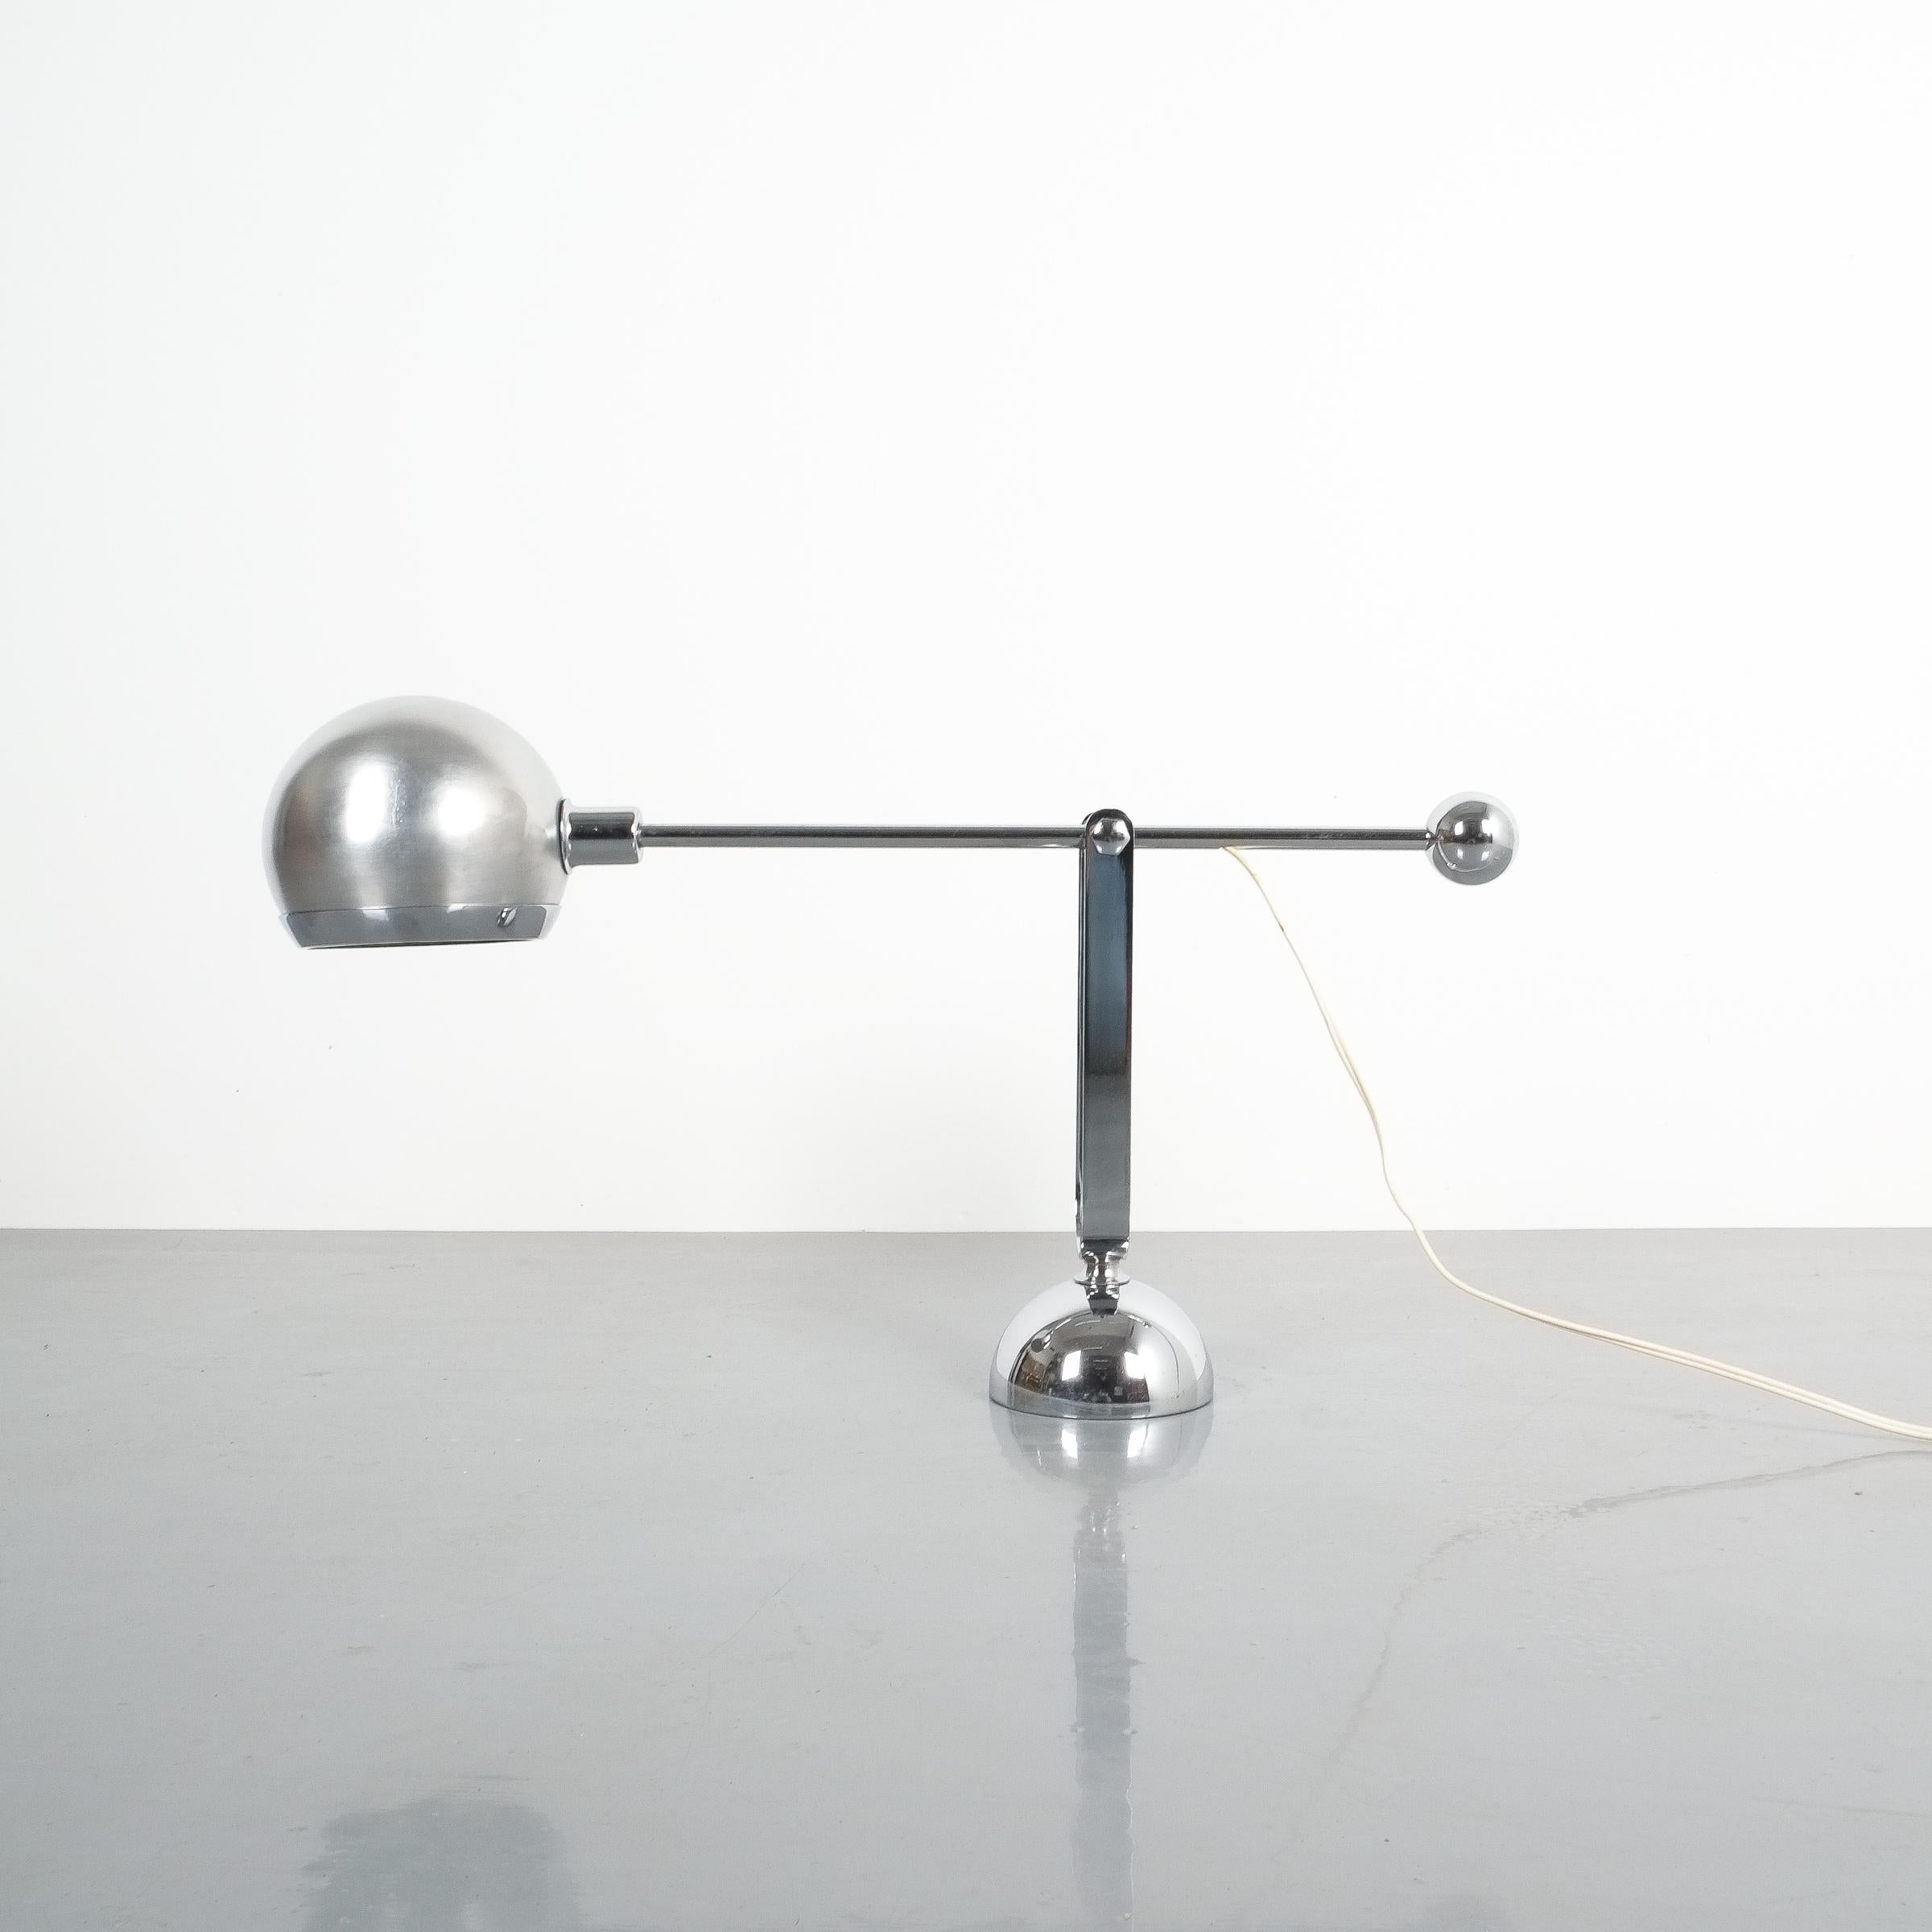 Italian chrome table lamp by Sergio Asti, Italy, circa 1970. Counterbalance desk light made from chromed brass and aluminum. Good condition, refurbished and polished.